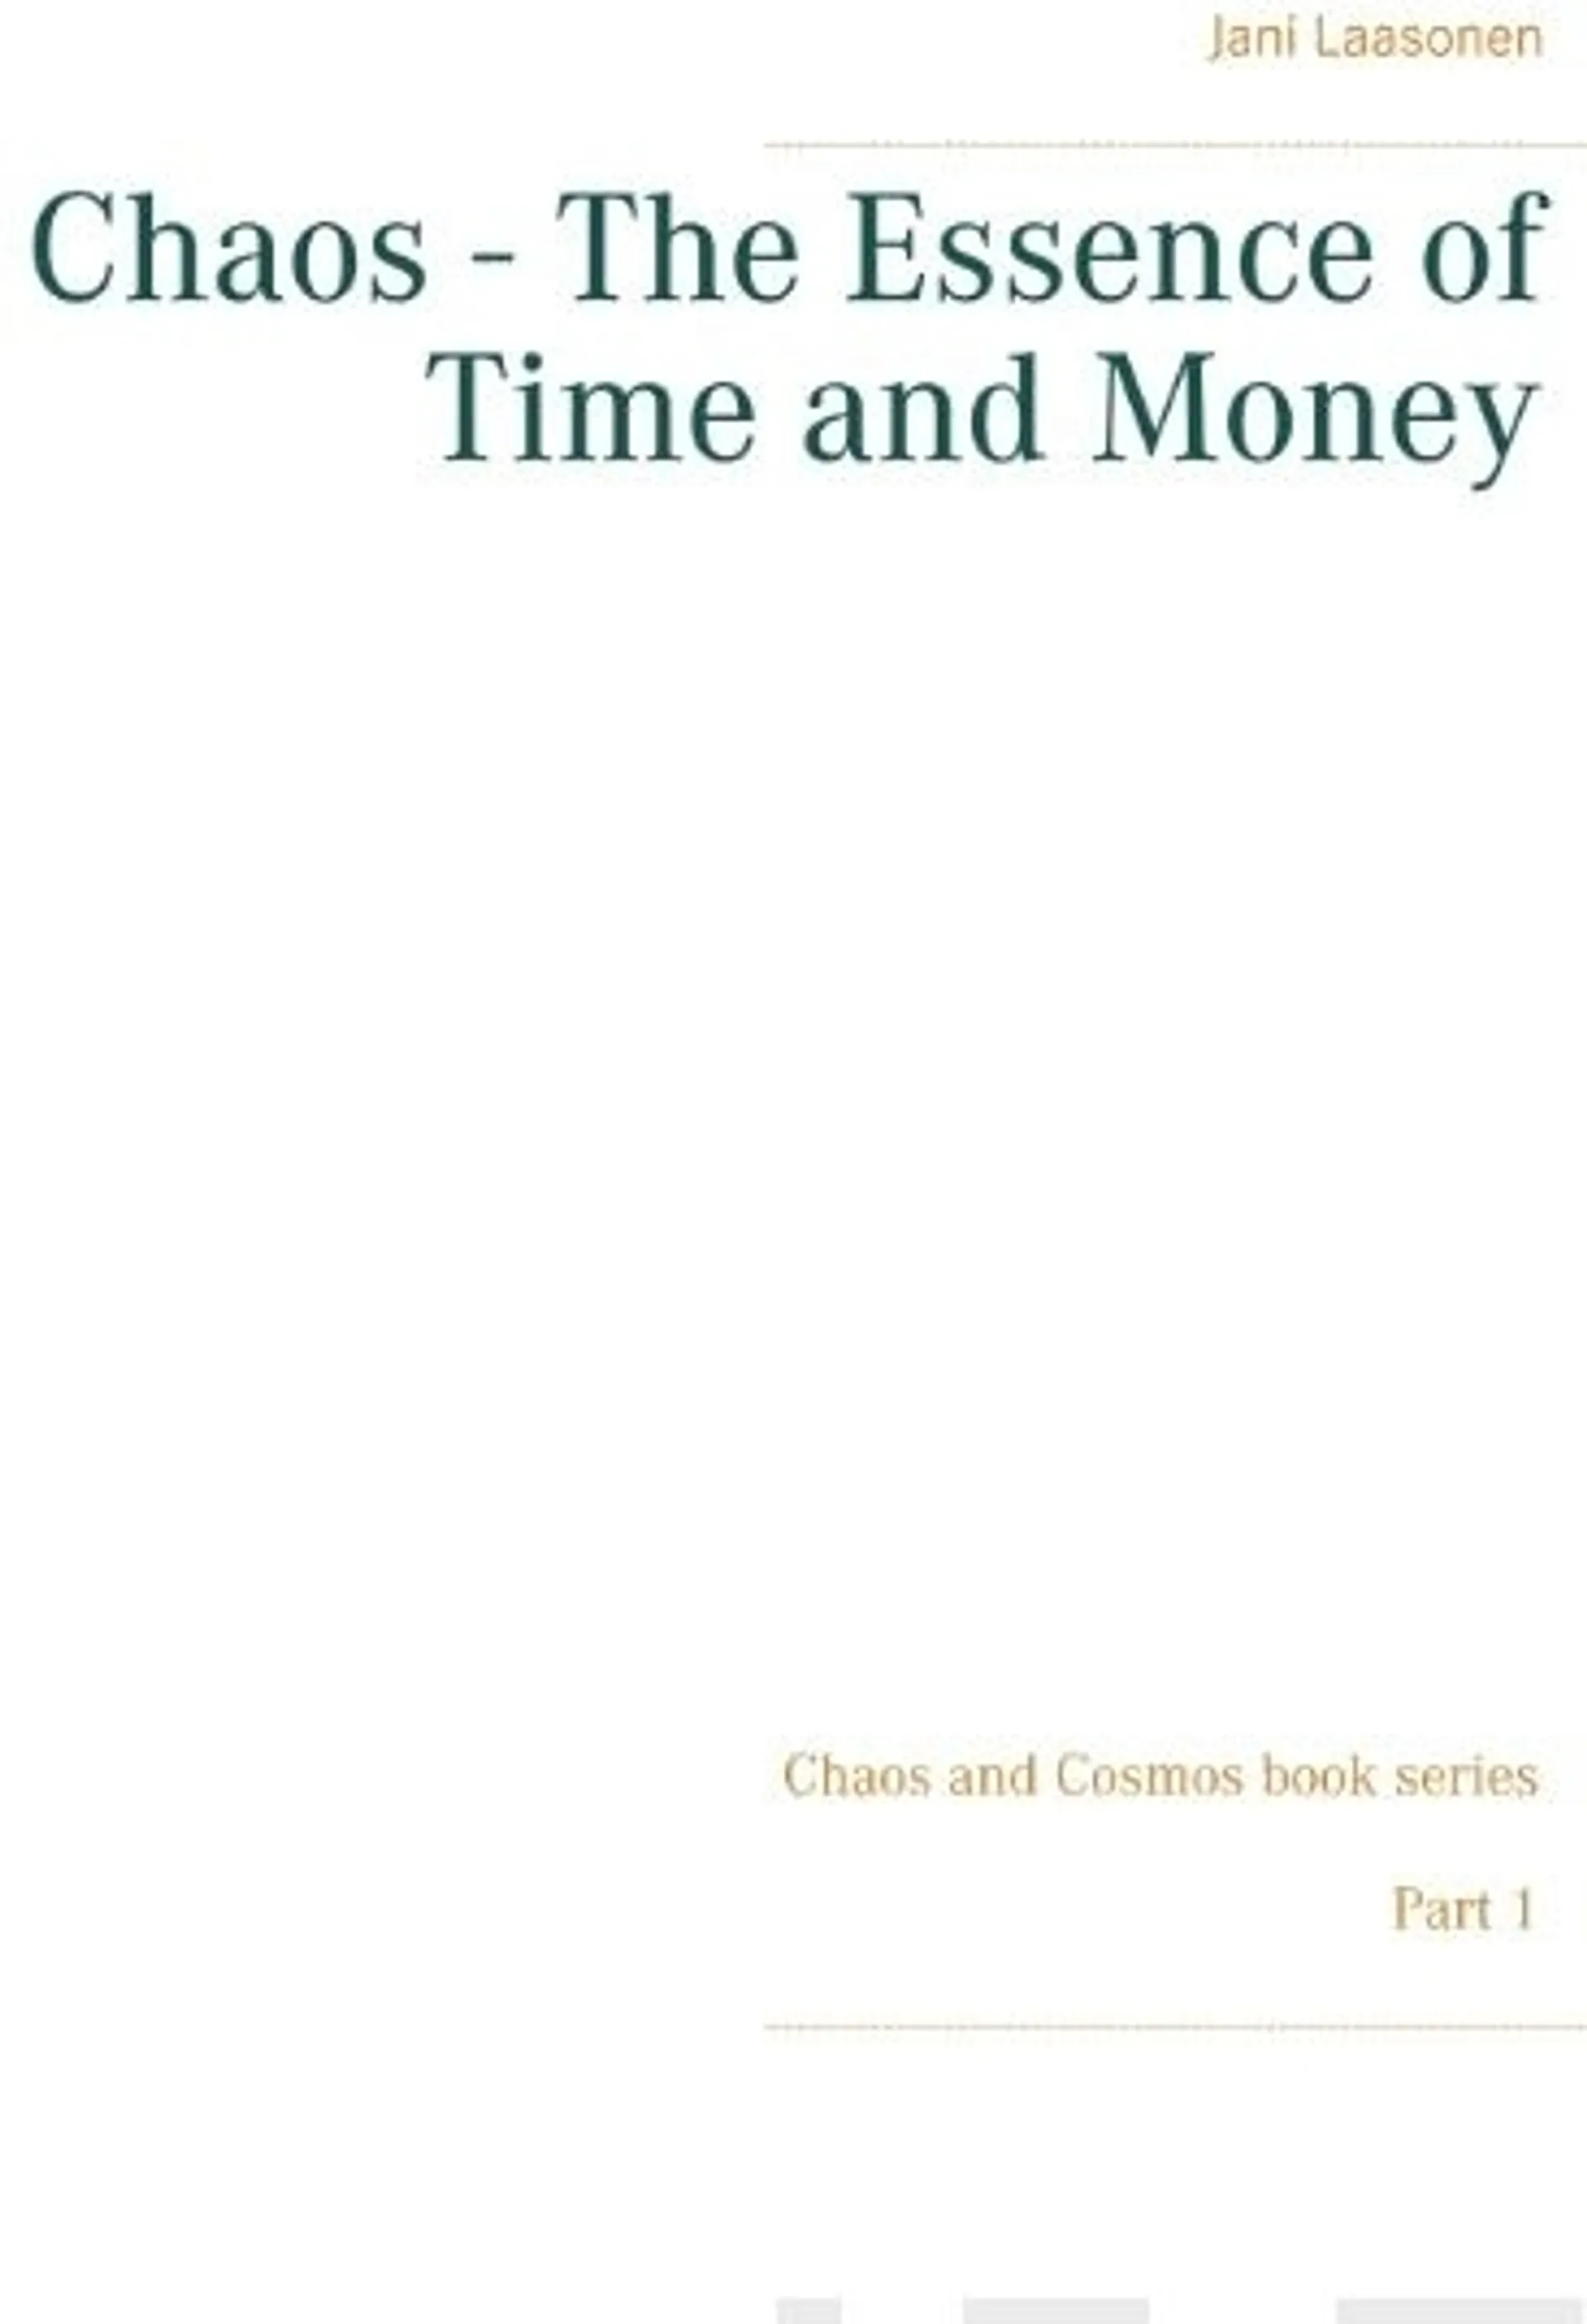 Laasonen, Chaos - The Essence of Time and Money